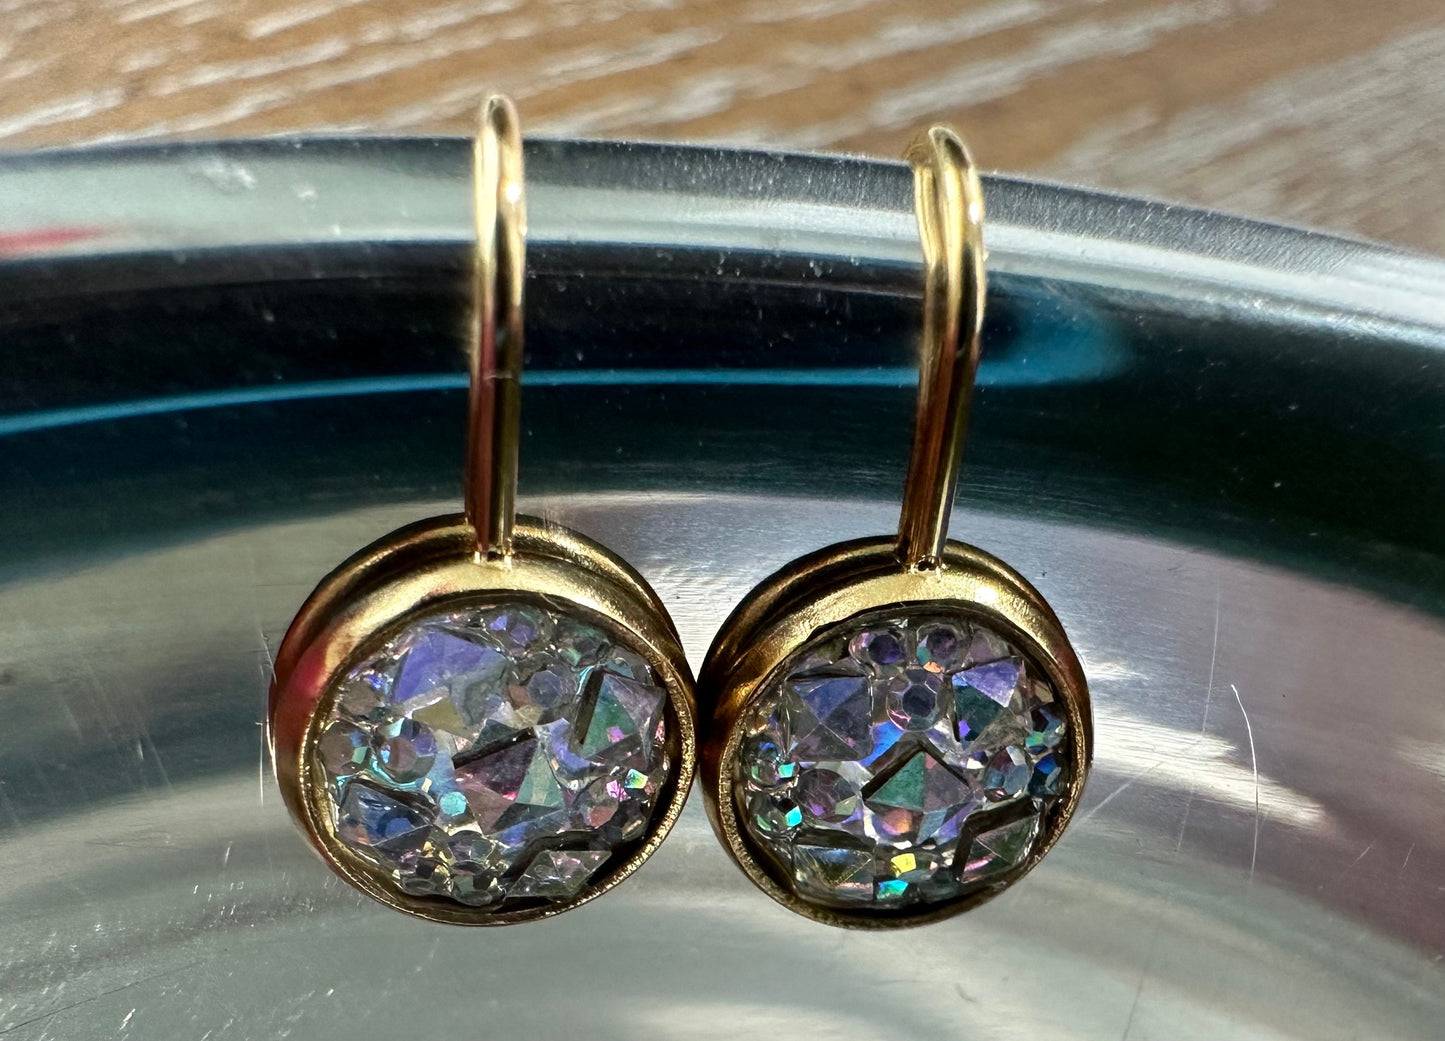 10M Clear Sparkly Druzy Gold French Lever Earrings, Stainless Steel, Very shiny, Great gift for girl or boy, Gold French Lever